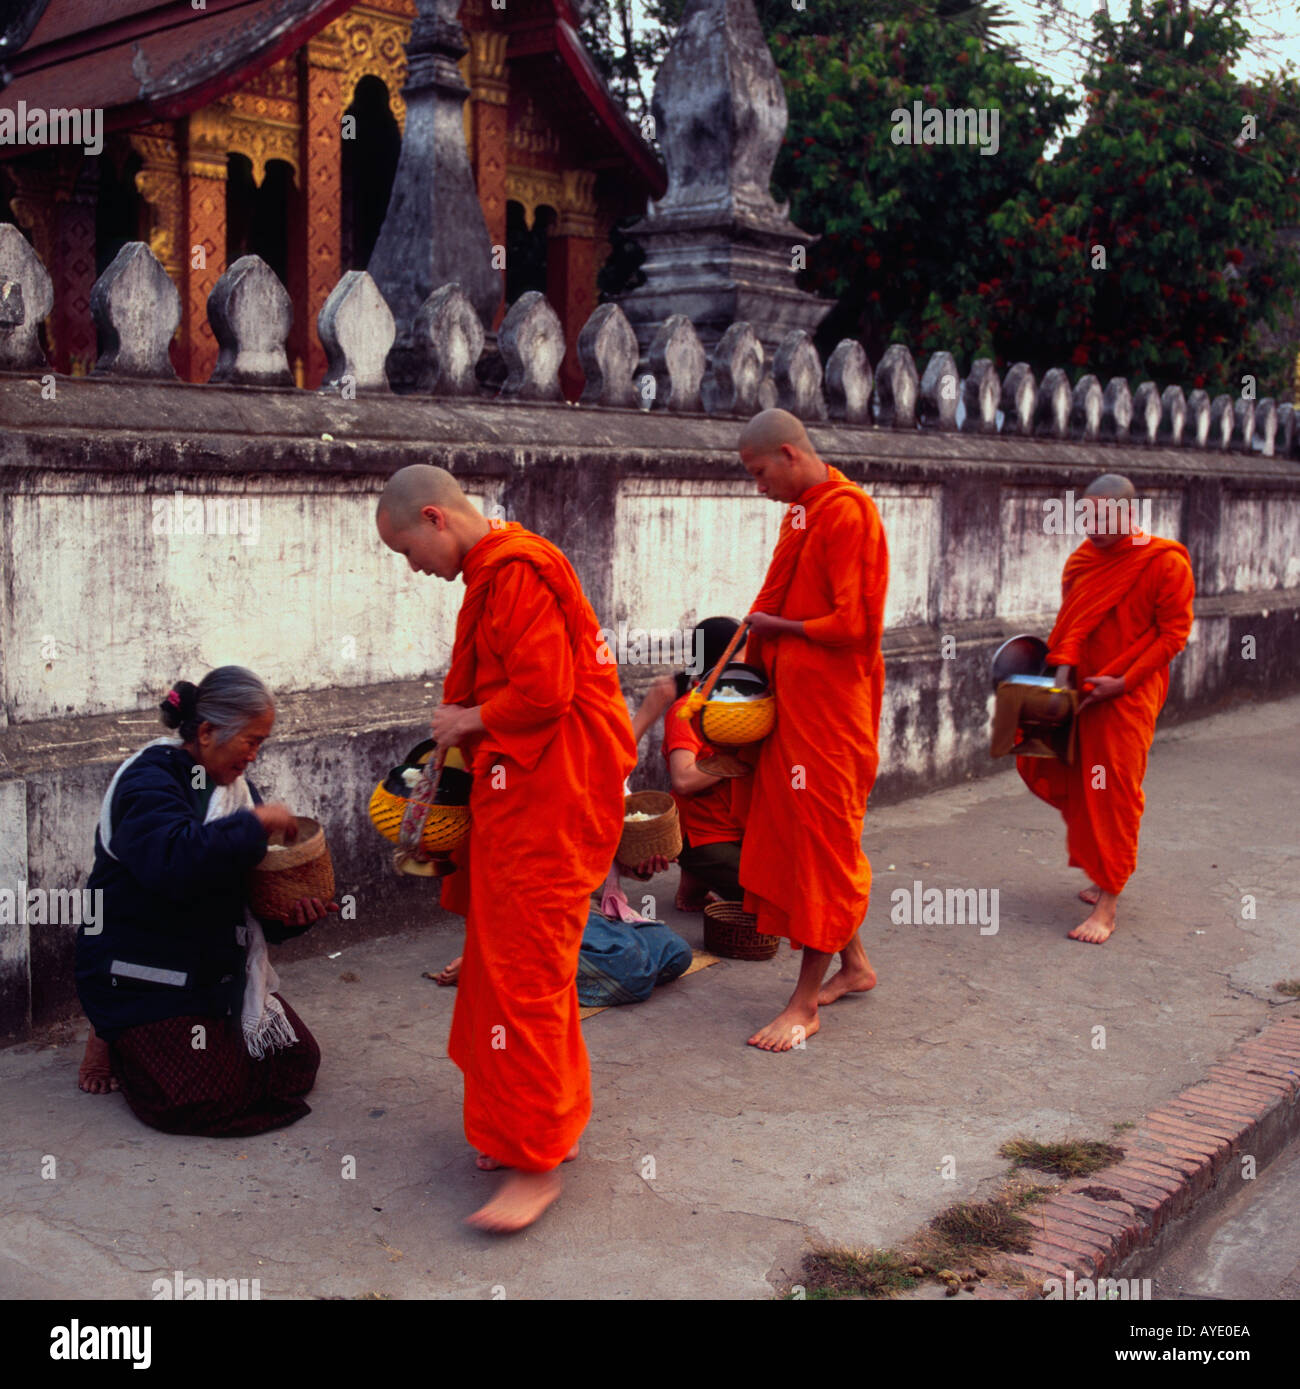 Laos Luang Prabang 3 monks on daily alms in front of Wat Saen temple Stock Photo